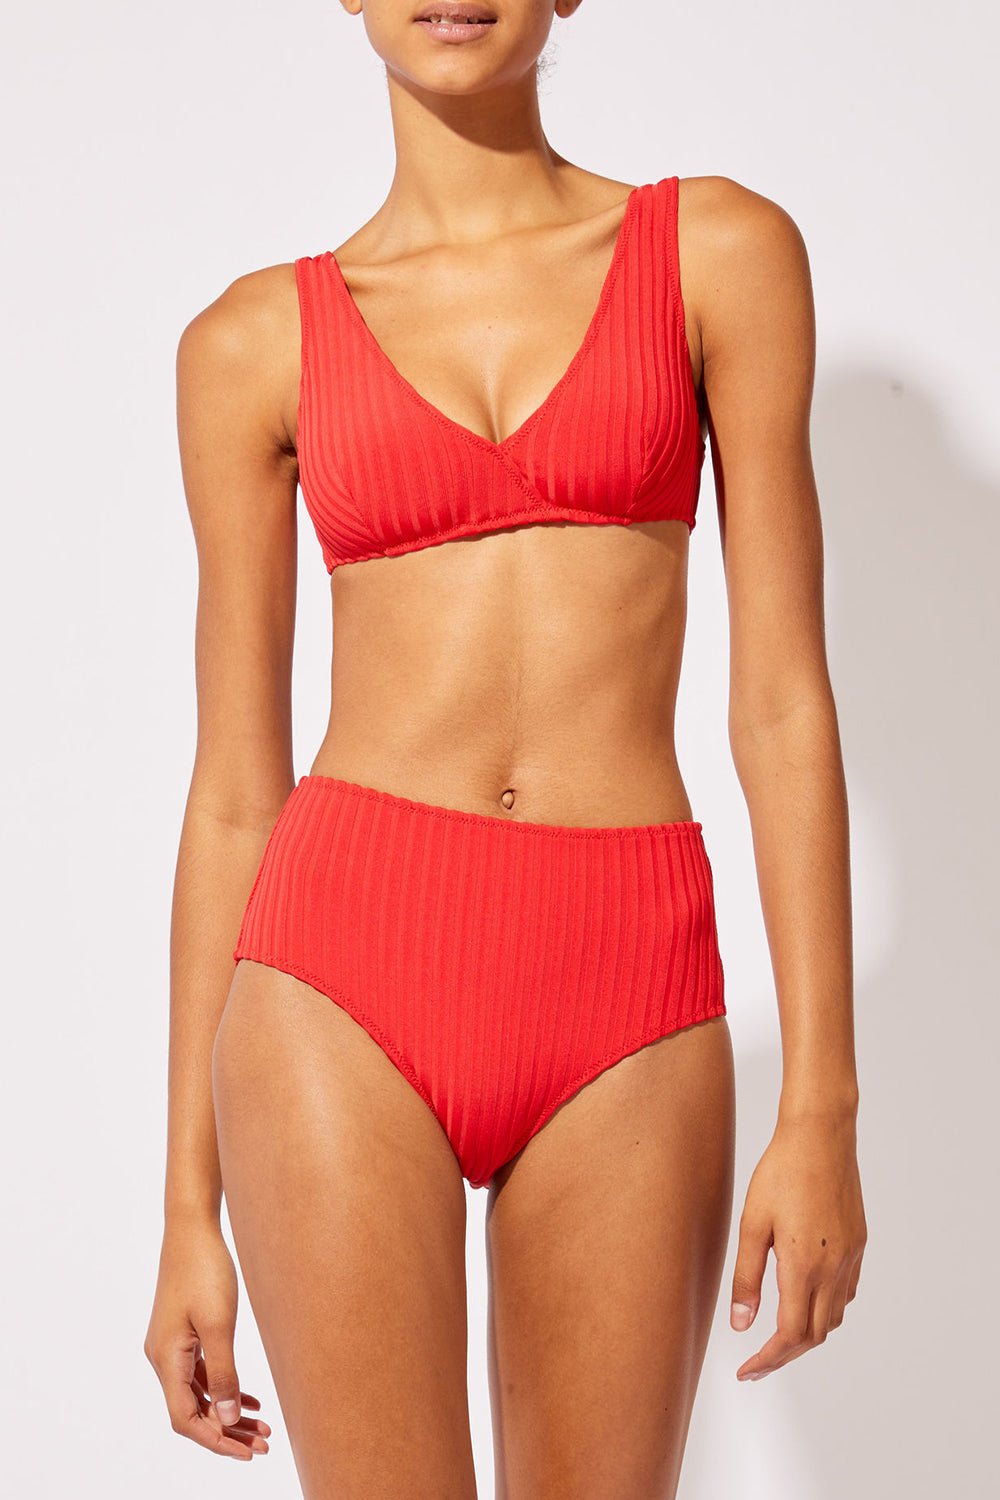 Pigmento Recuento Asistente The Beverly Ribbed Bikini Top in Solid Rib Ruby Red | Solid & Striped